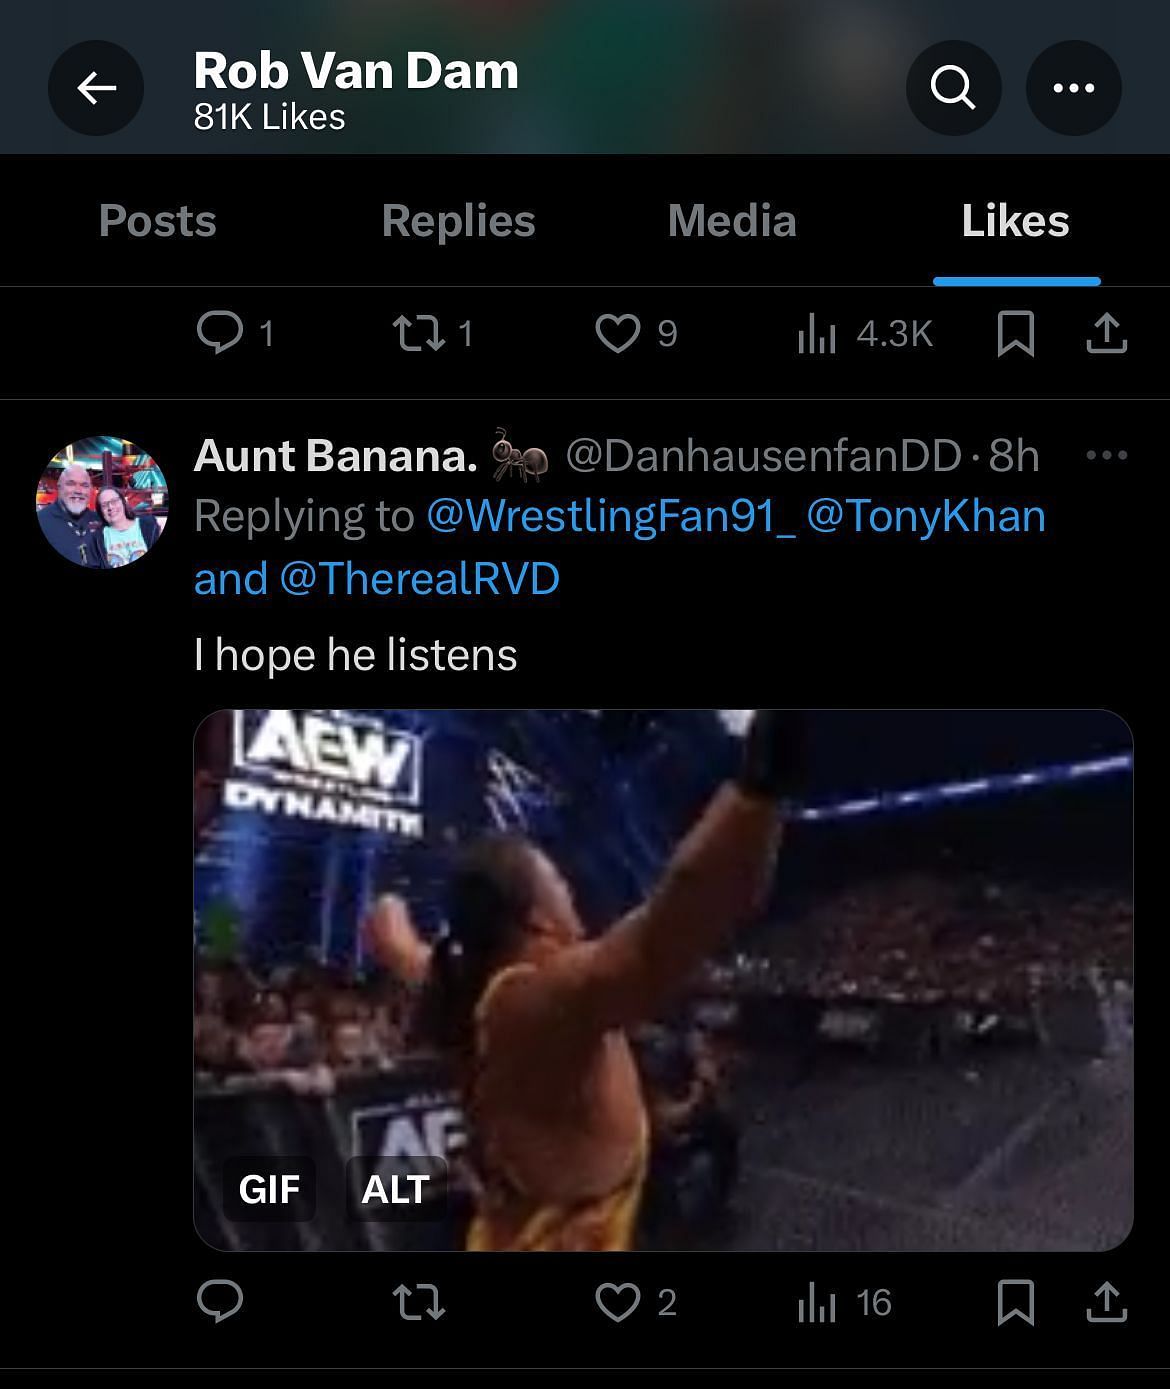 RVD liked a comment possibly hinting at his desire to sign with AEW.